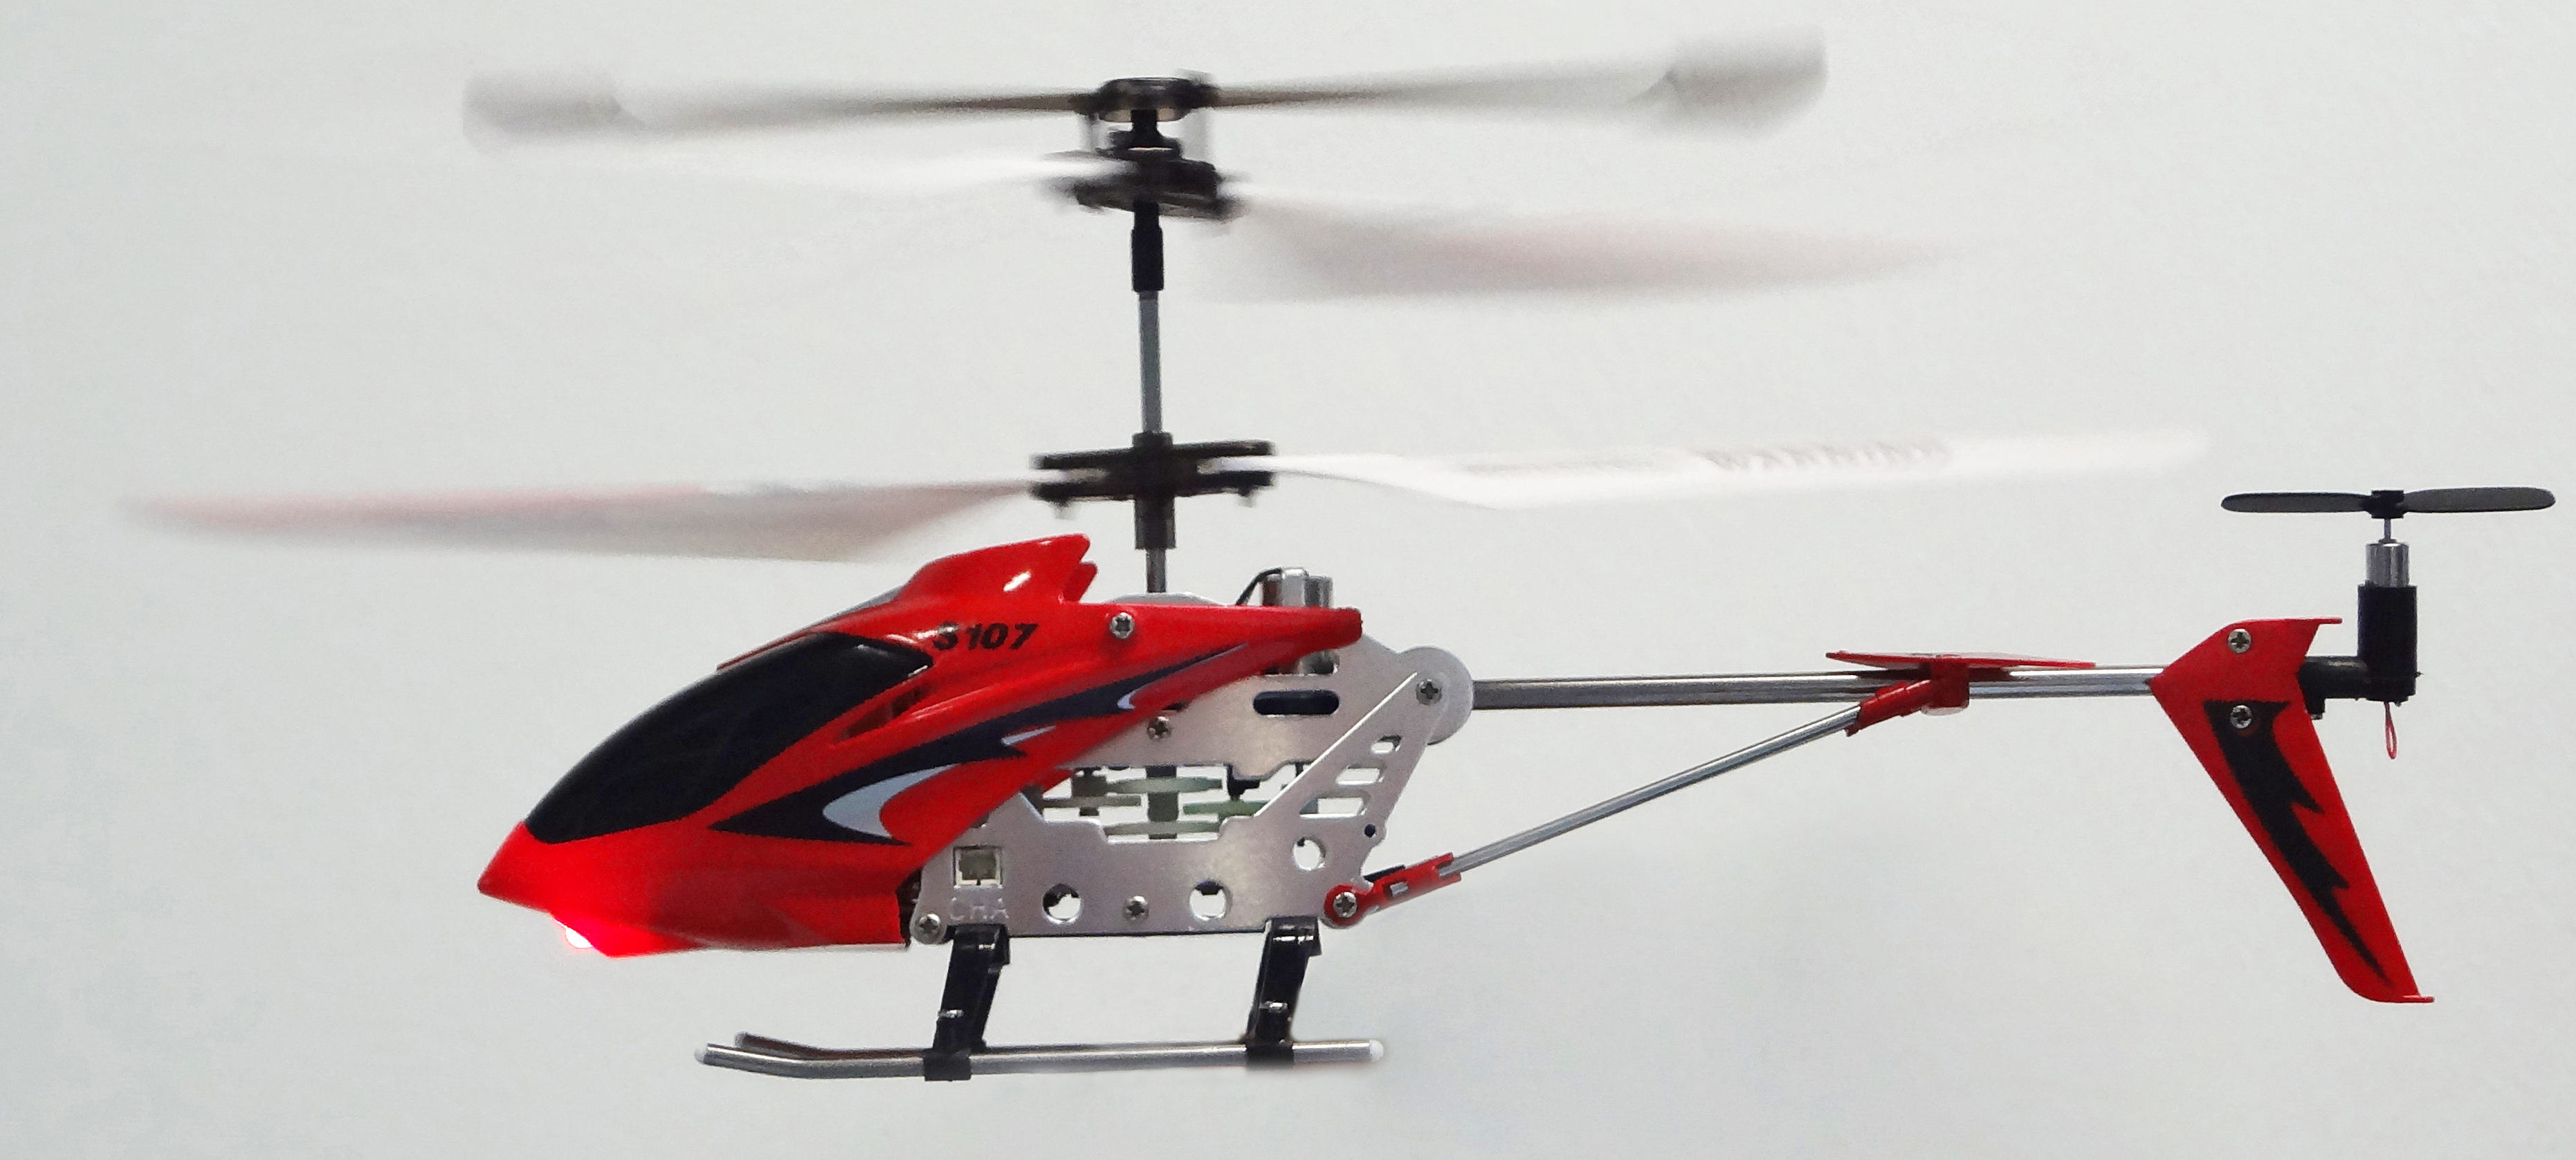 A photo of a remote controlled helicopter